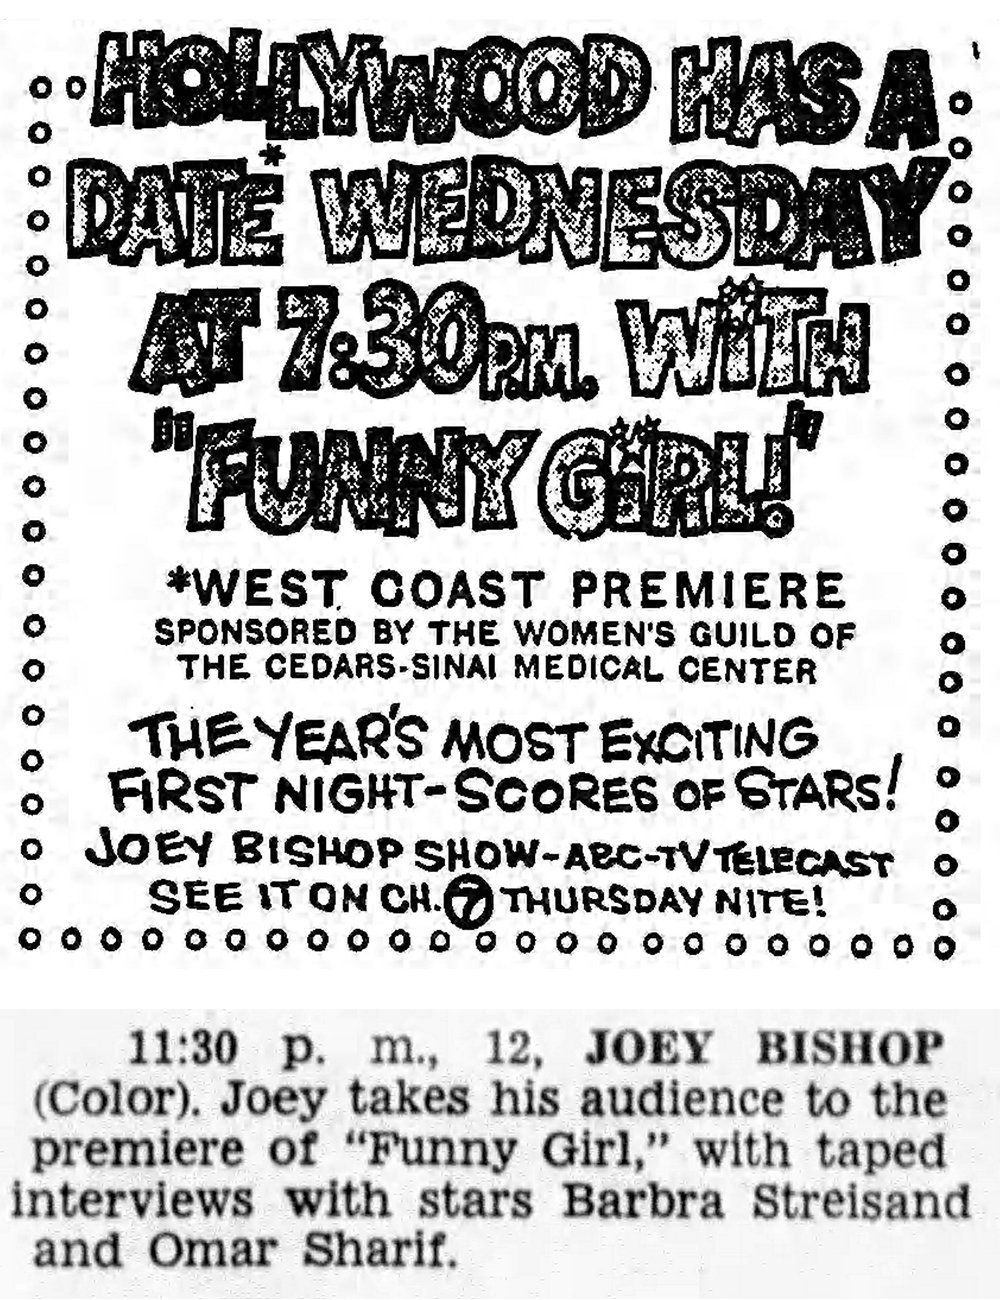 Two newspaper ads for the Joey Bishop Show